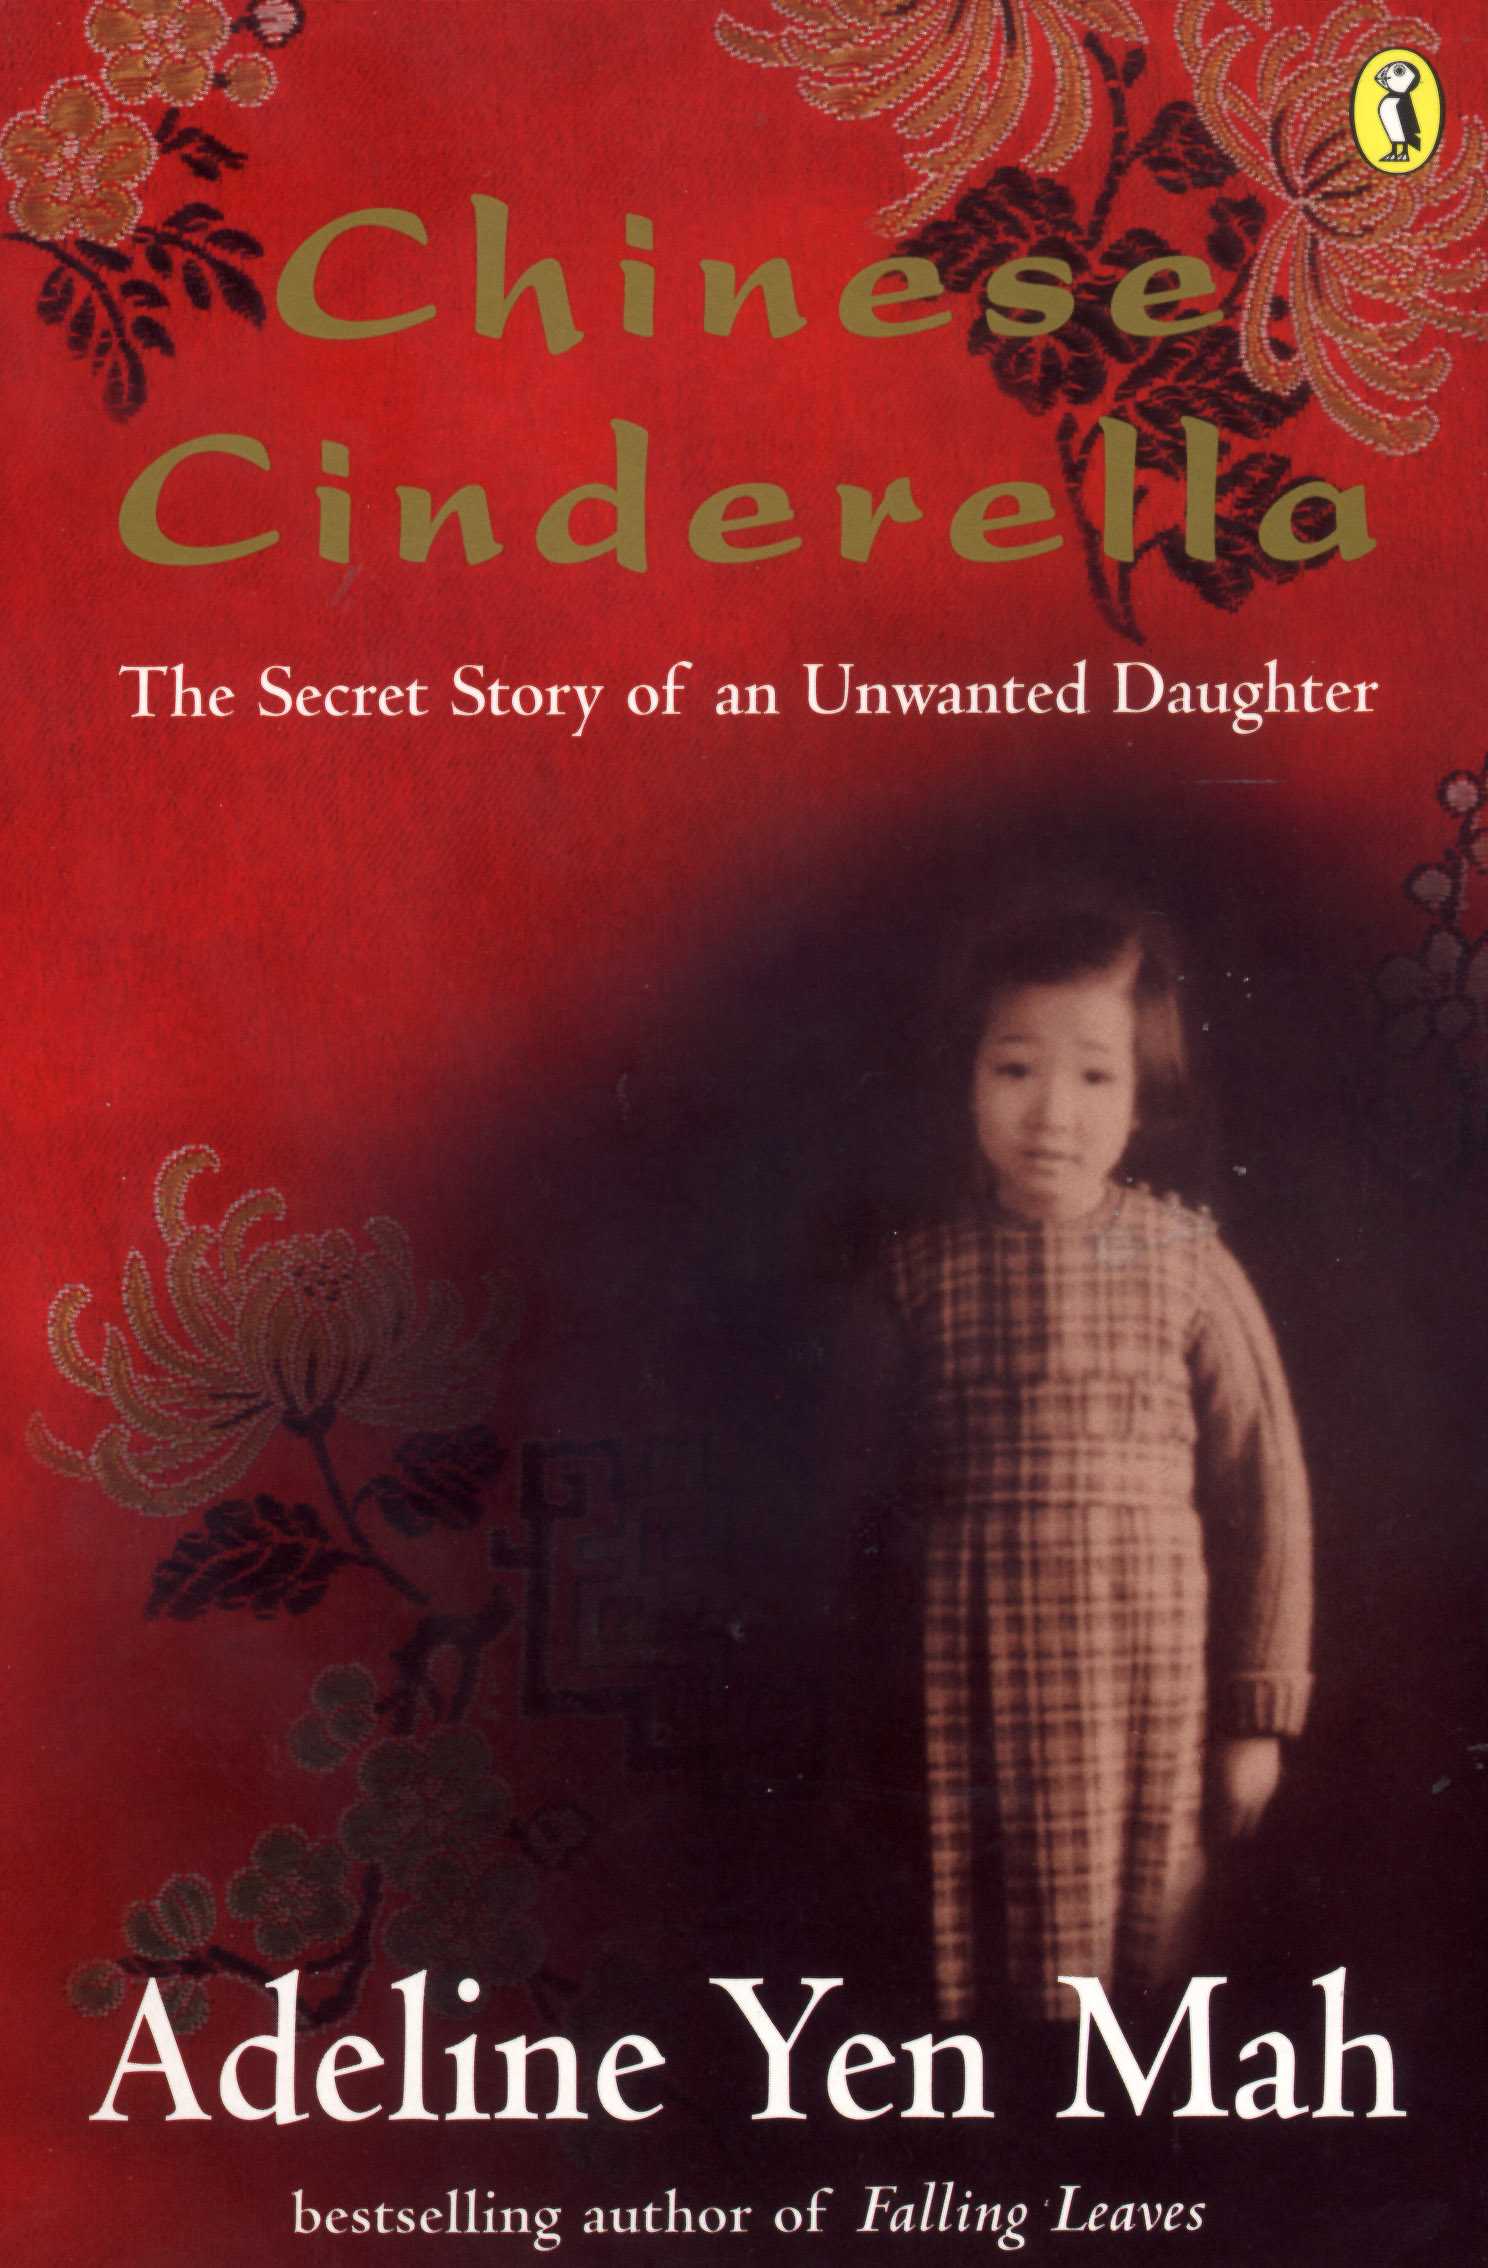 The 2,200-year-old Tale of the Chinese Cinderella